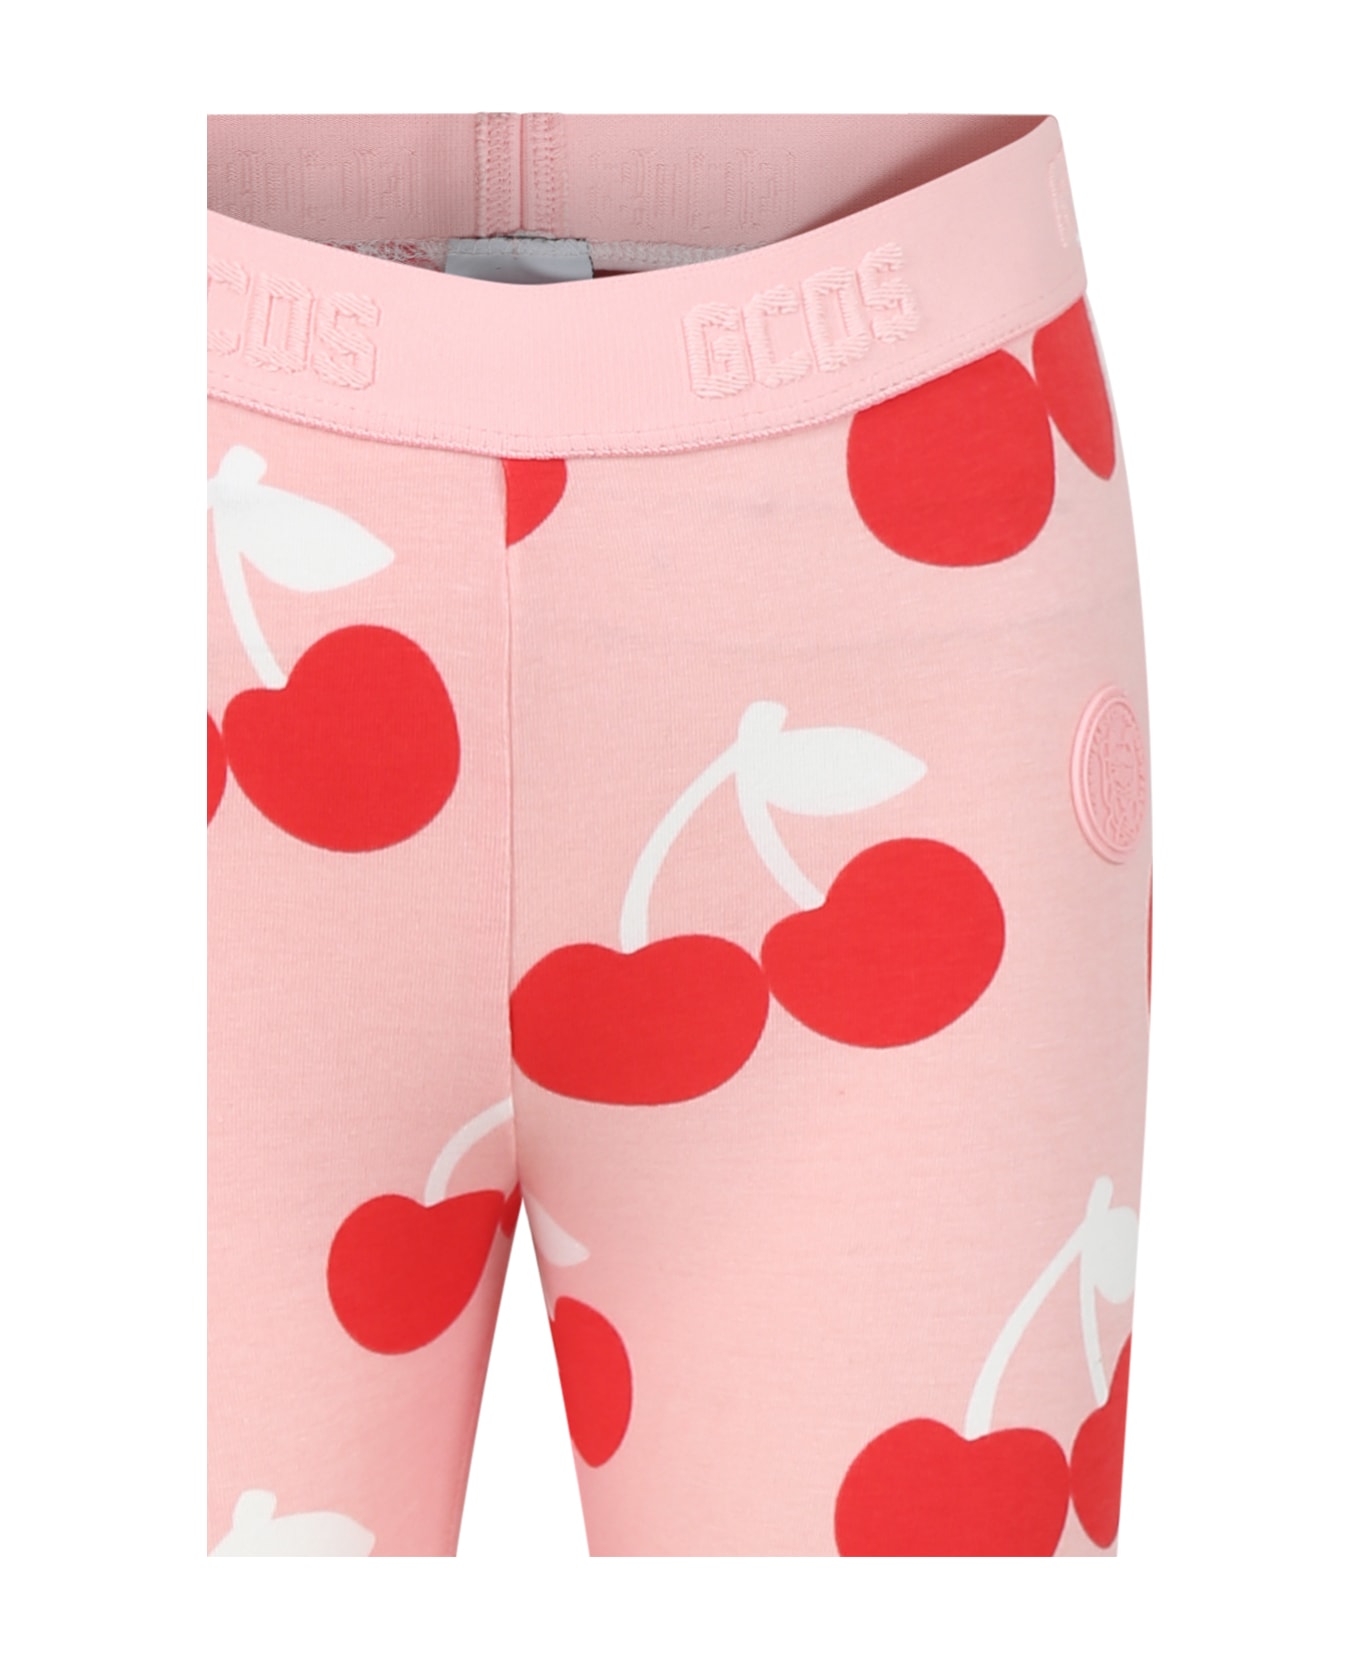 GCDS Mini Pink Leggings For Girl With Cherries - Pink ボトムス